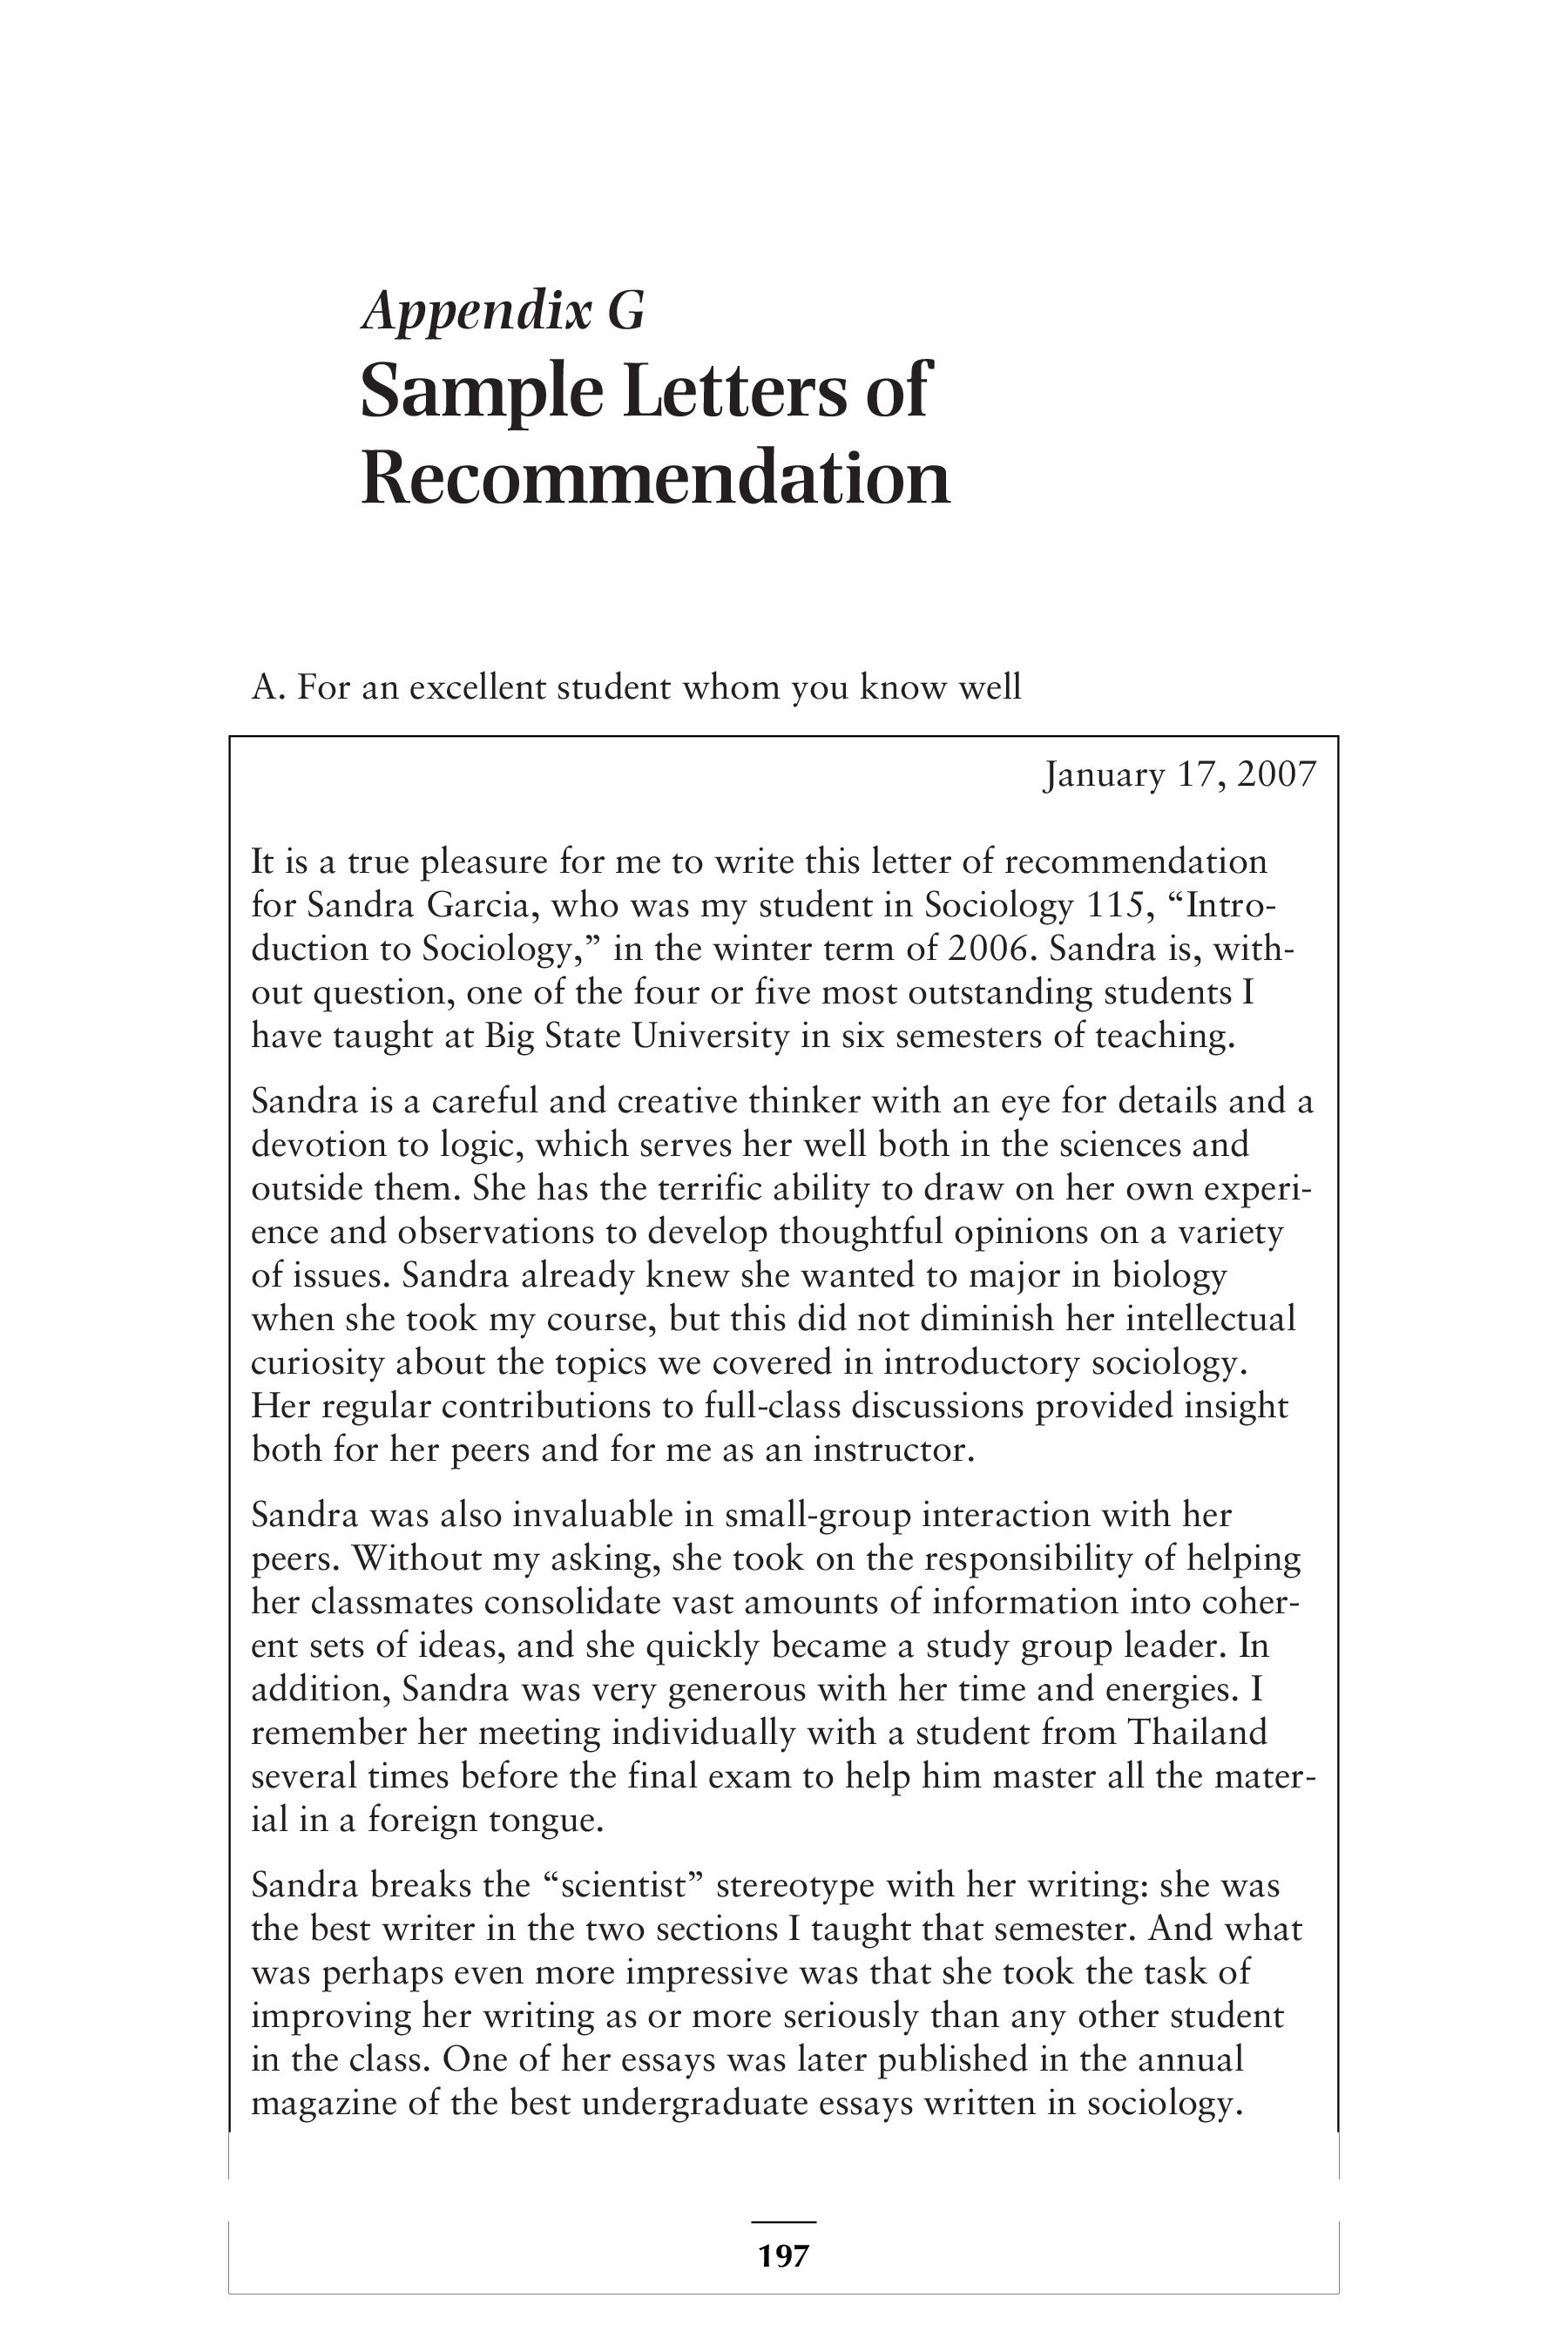 Free Letter Of Recommendation For Sociology Student Templates At